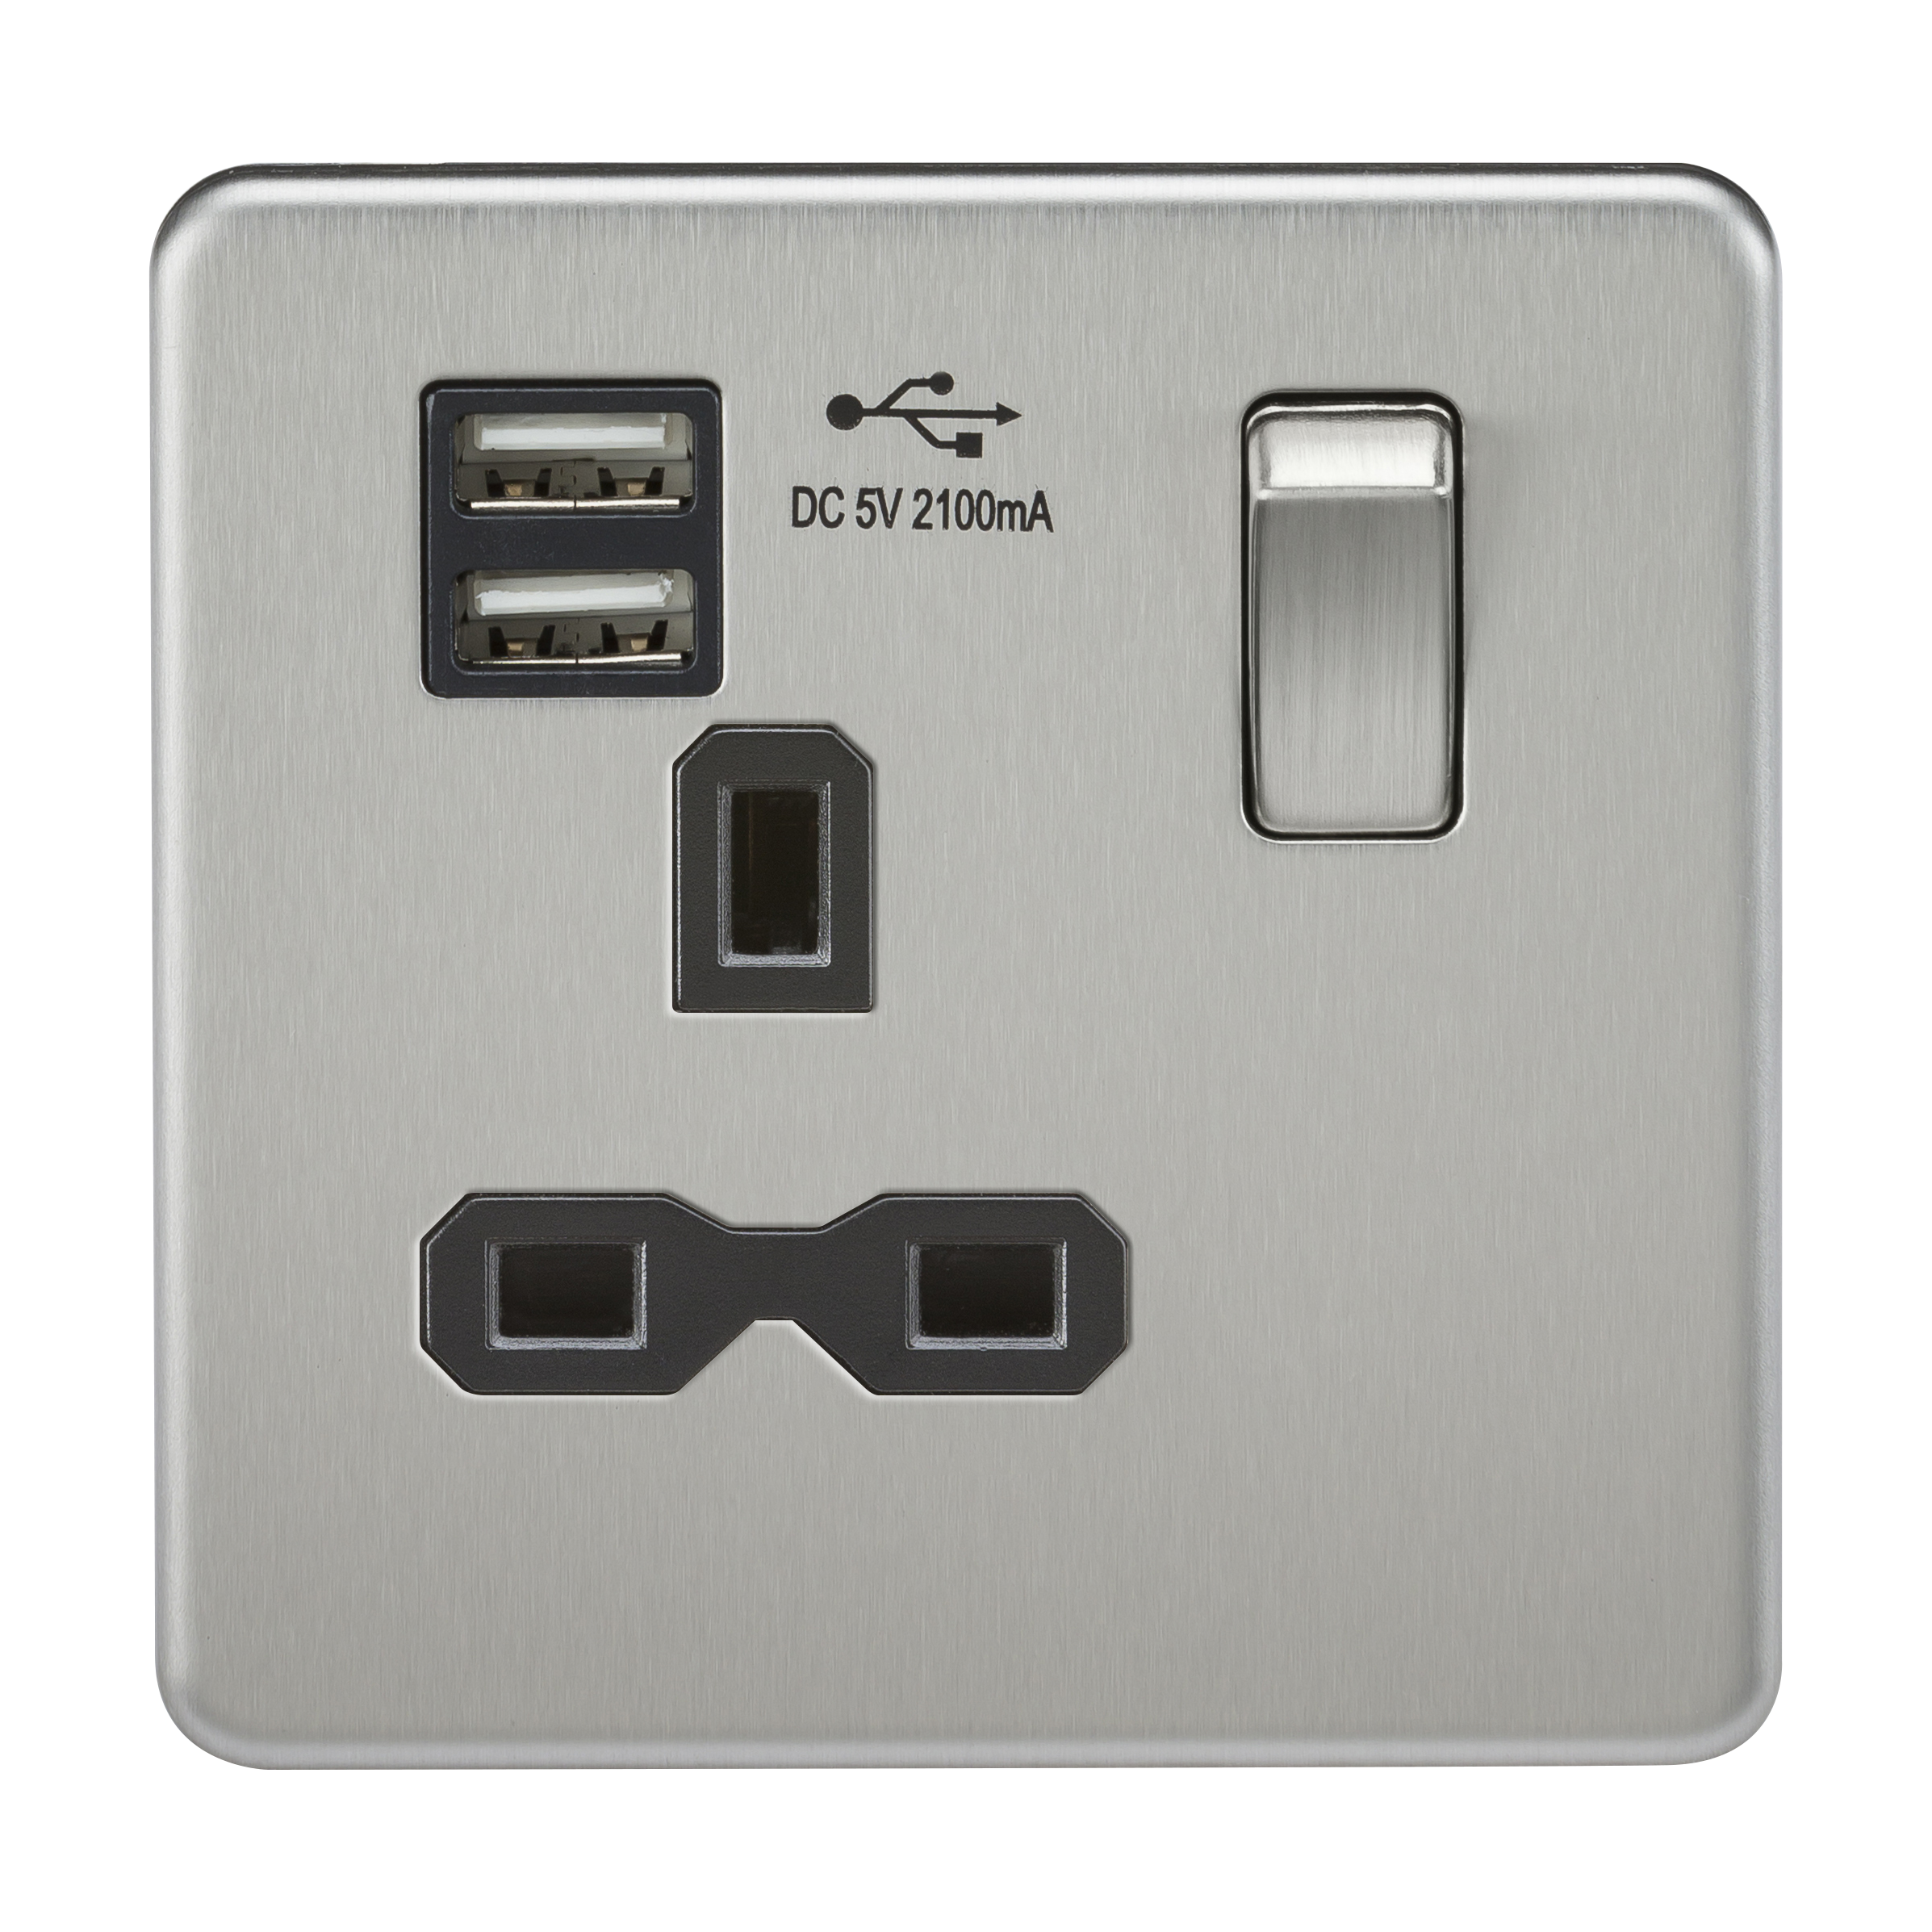 Screwless 13A 1G Switched Socket With Dual USB Charger (2.1A) - Brushed Chrome With Black Insert - SFR9901BC 